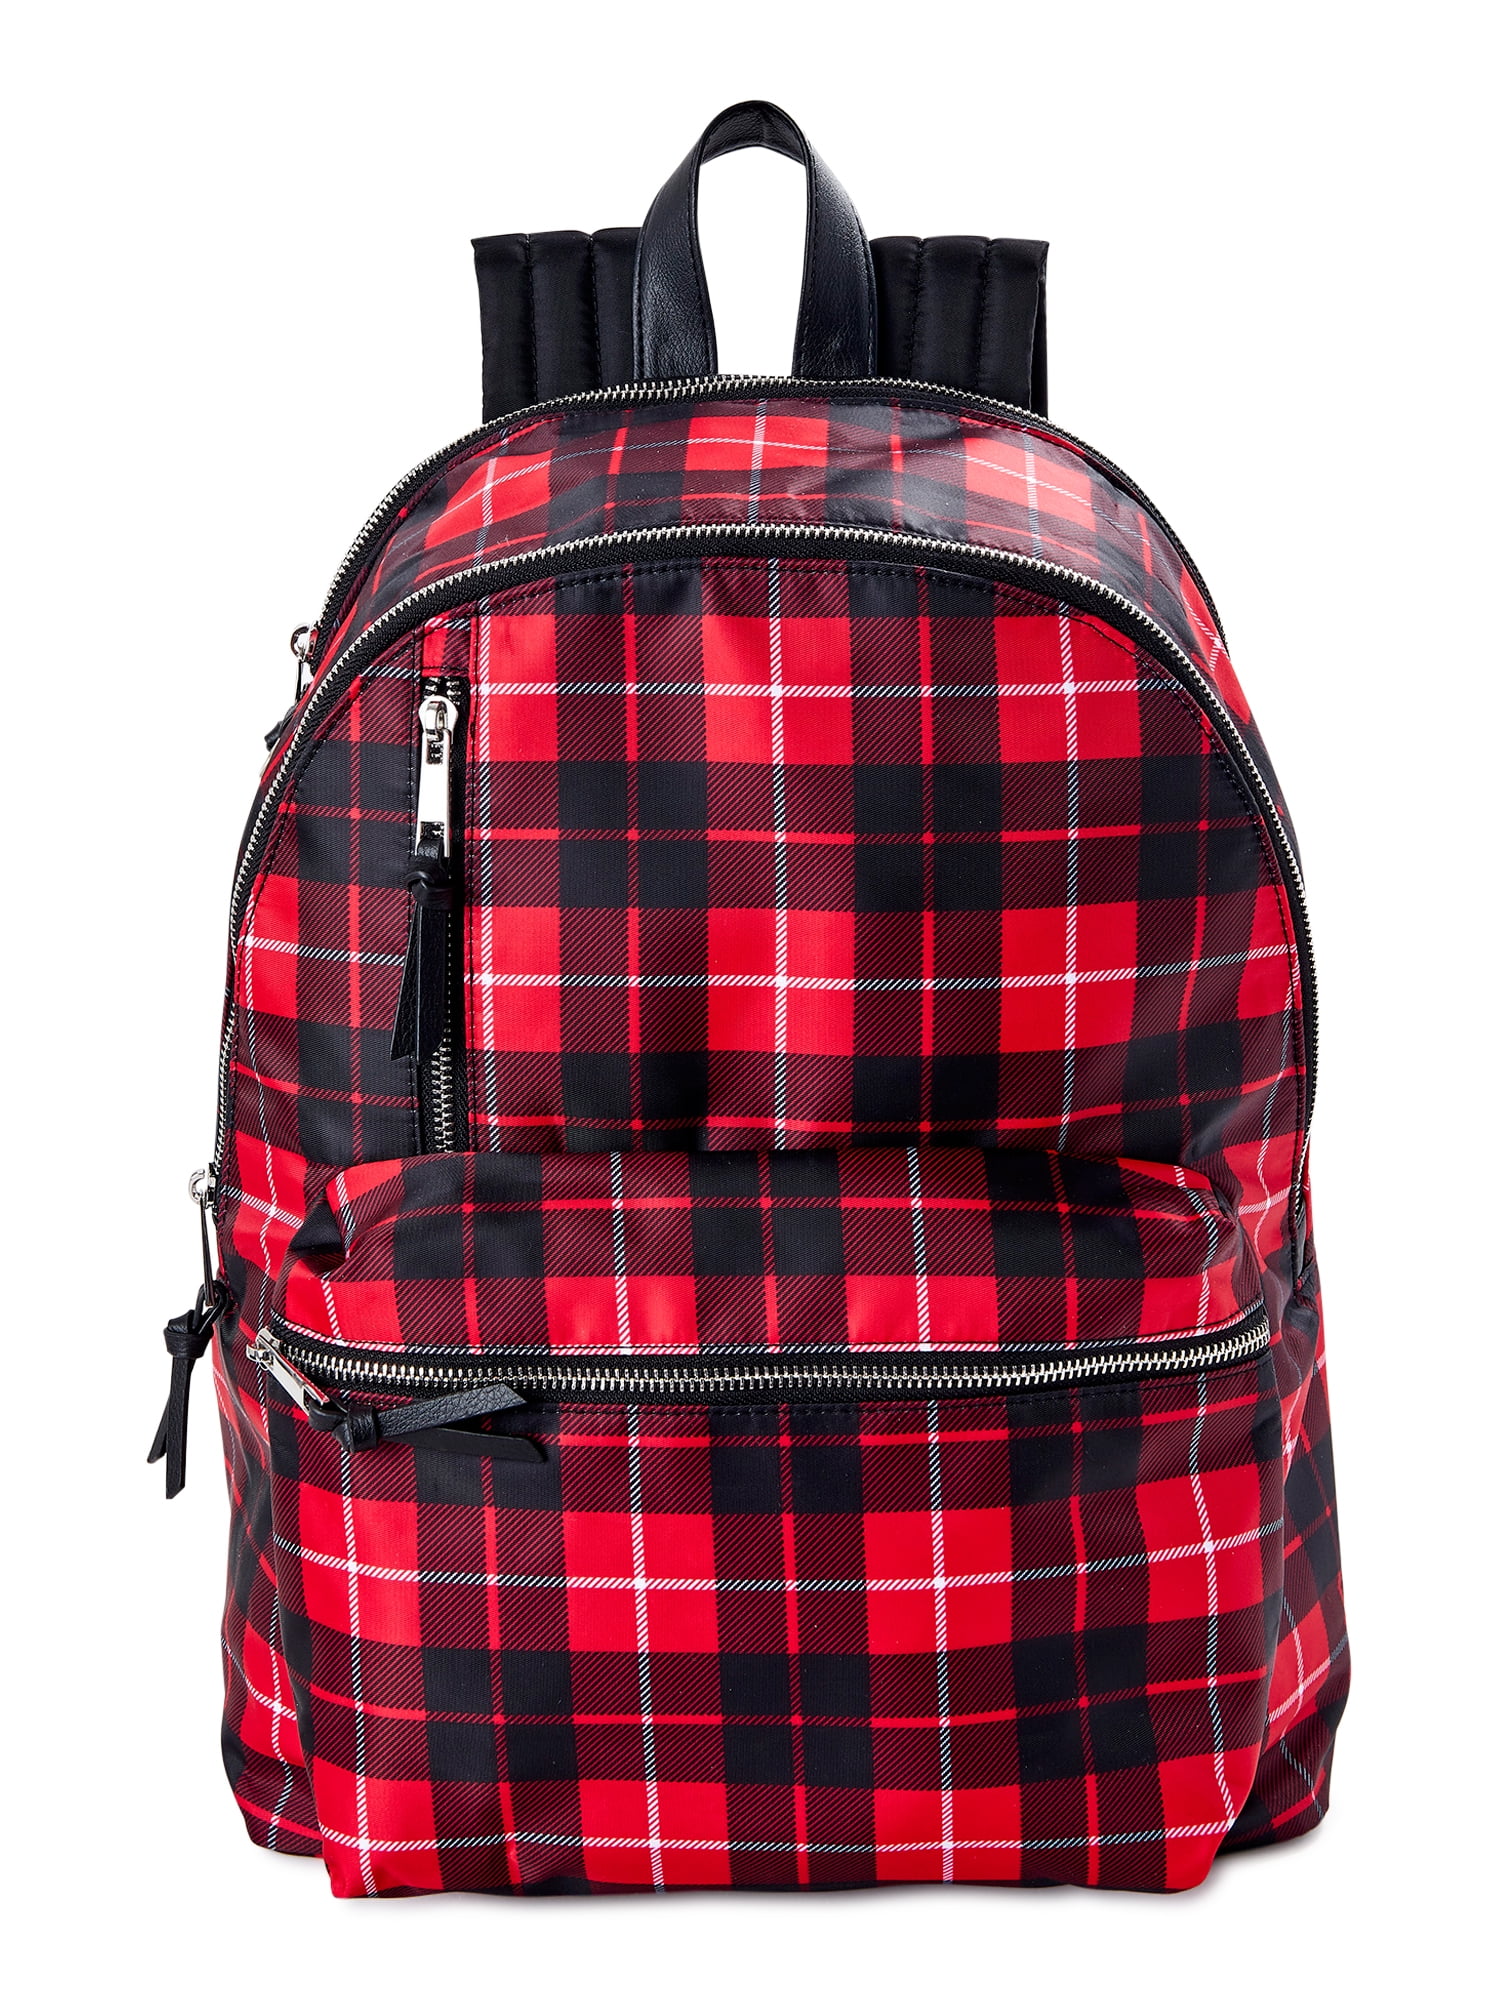 No Boundaries Women's Dome Zip Backpack, Brilliant Red Plaid